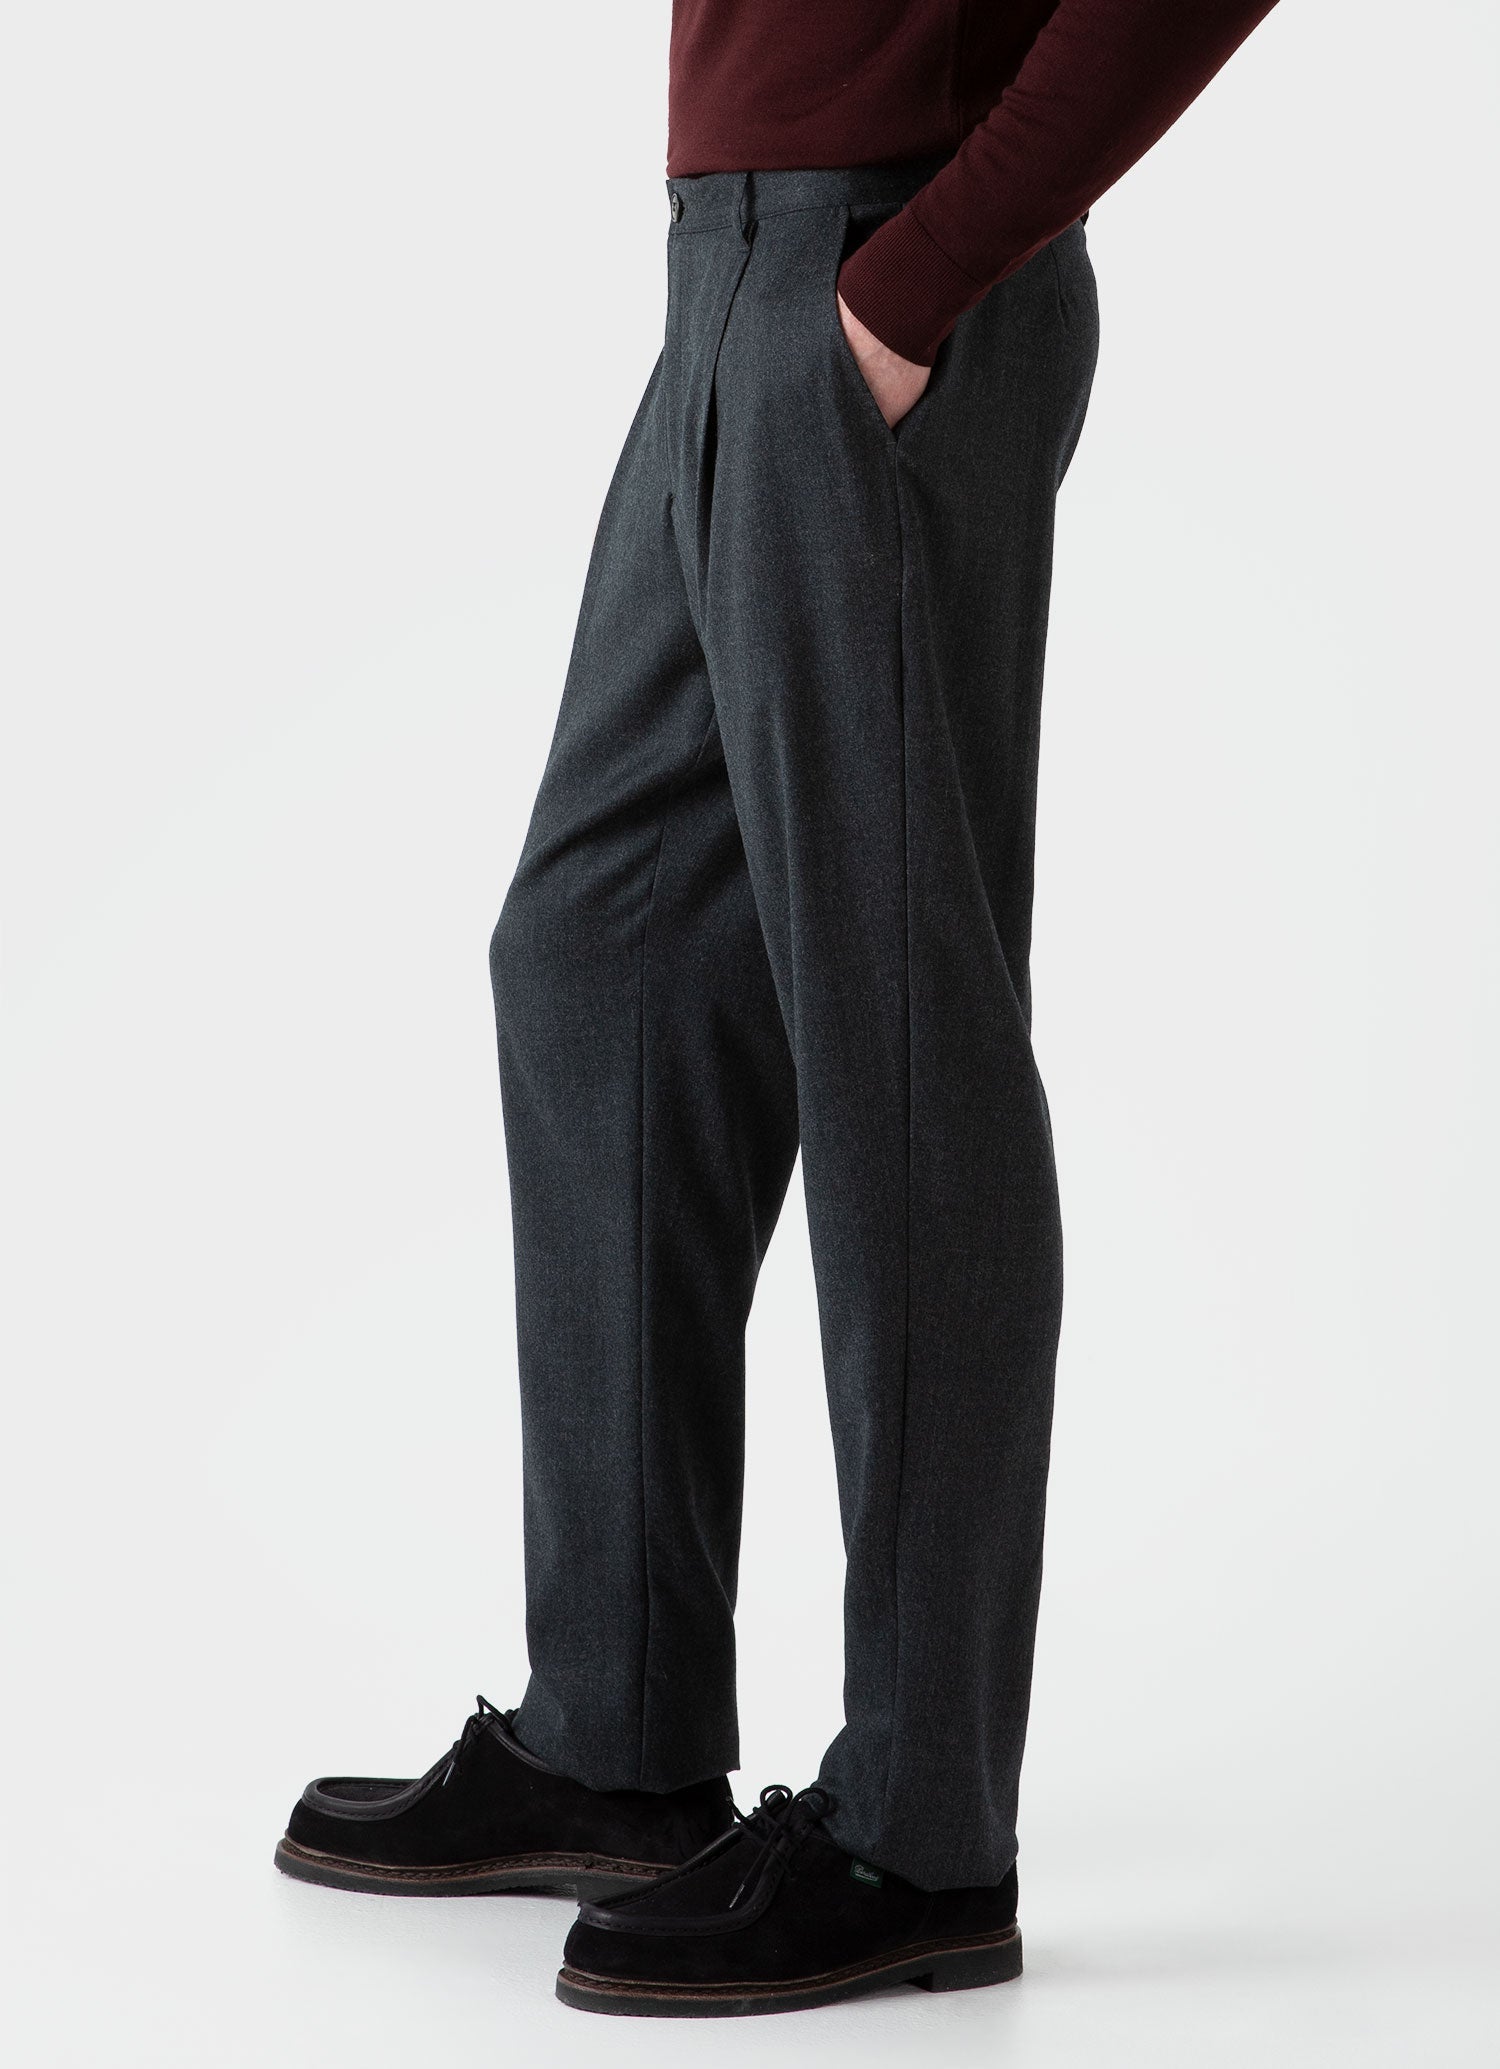 Mens Classic Fit Solid Black Flat Front Wool Dress Pants at Amazon Men's  Clothing store